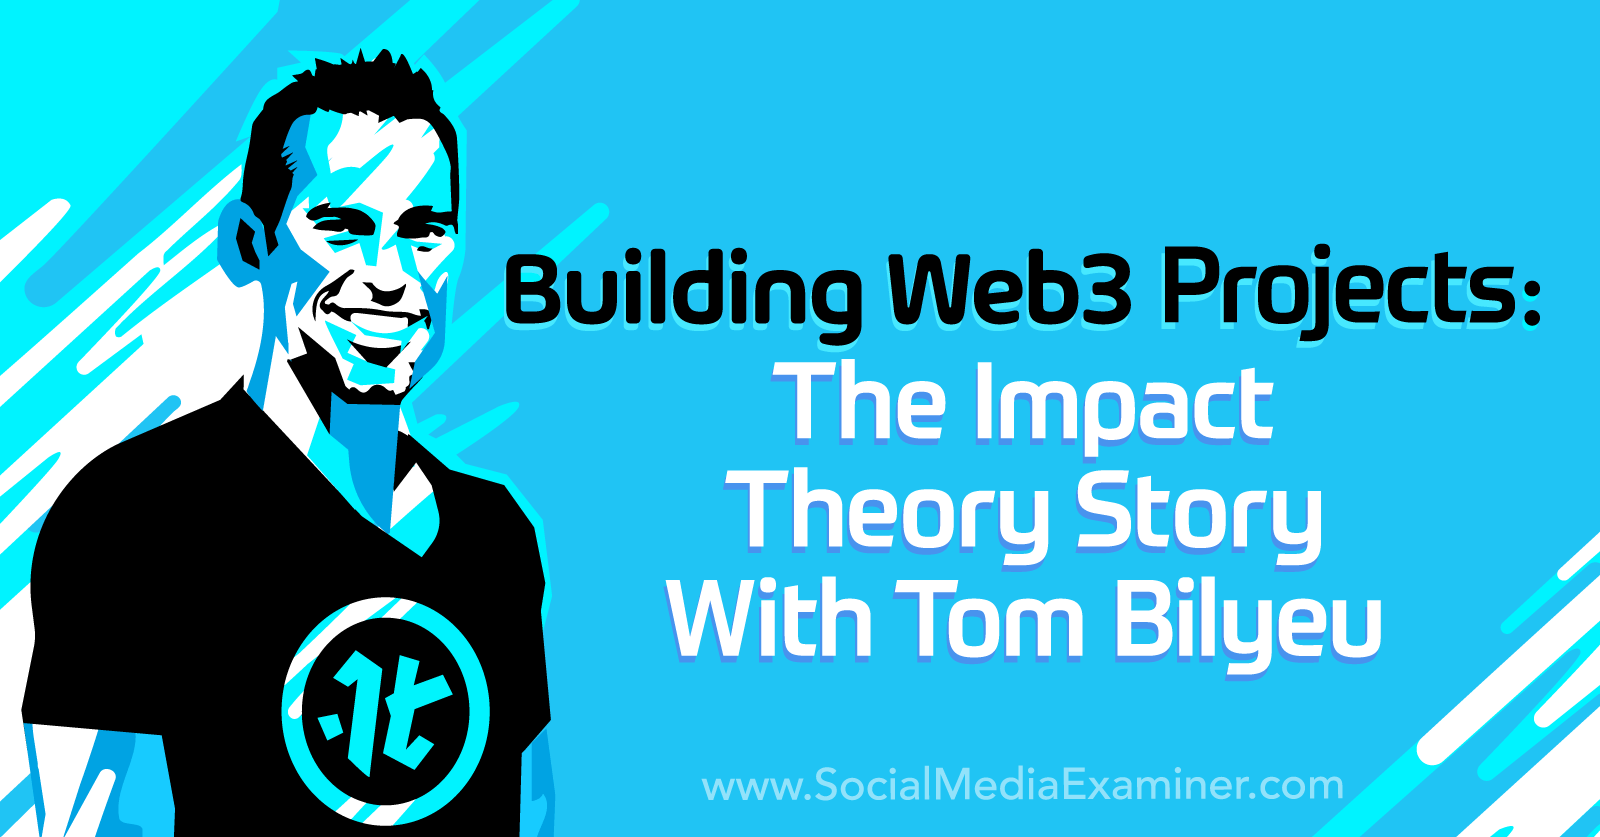 Building Web3 Projects: The Impact Theory Story With Tom Bilyeu by Social Media Examiner